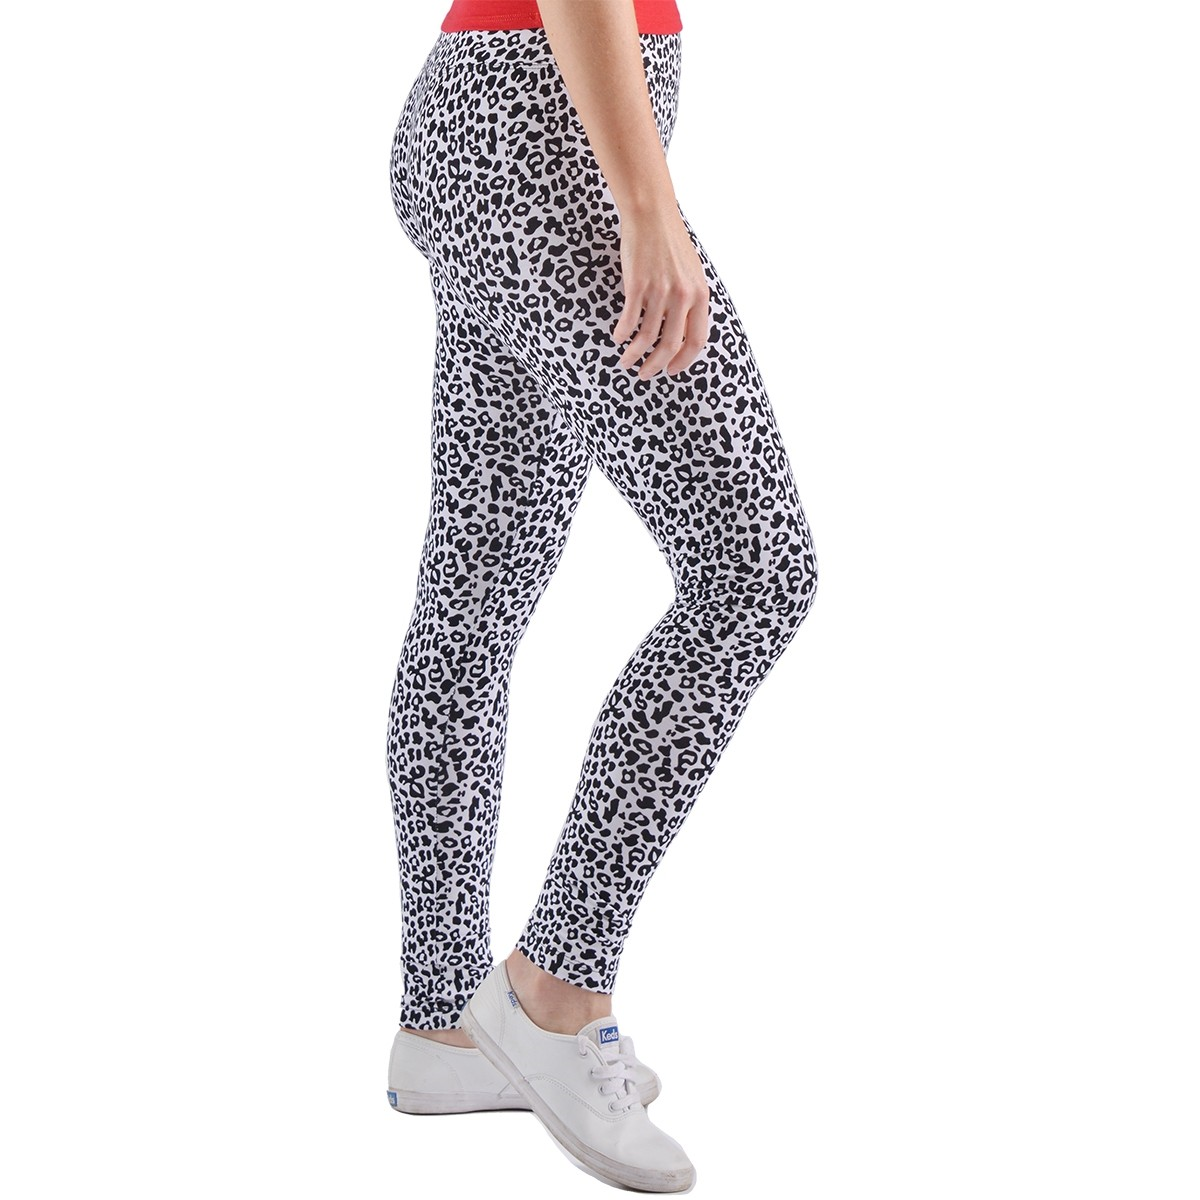 Eve Yoga Leggings-Leopard-Bamboo-Sustainable Canadian Made Women's